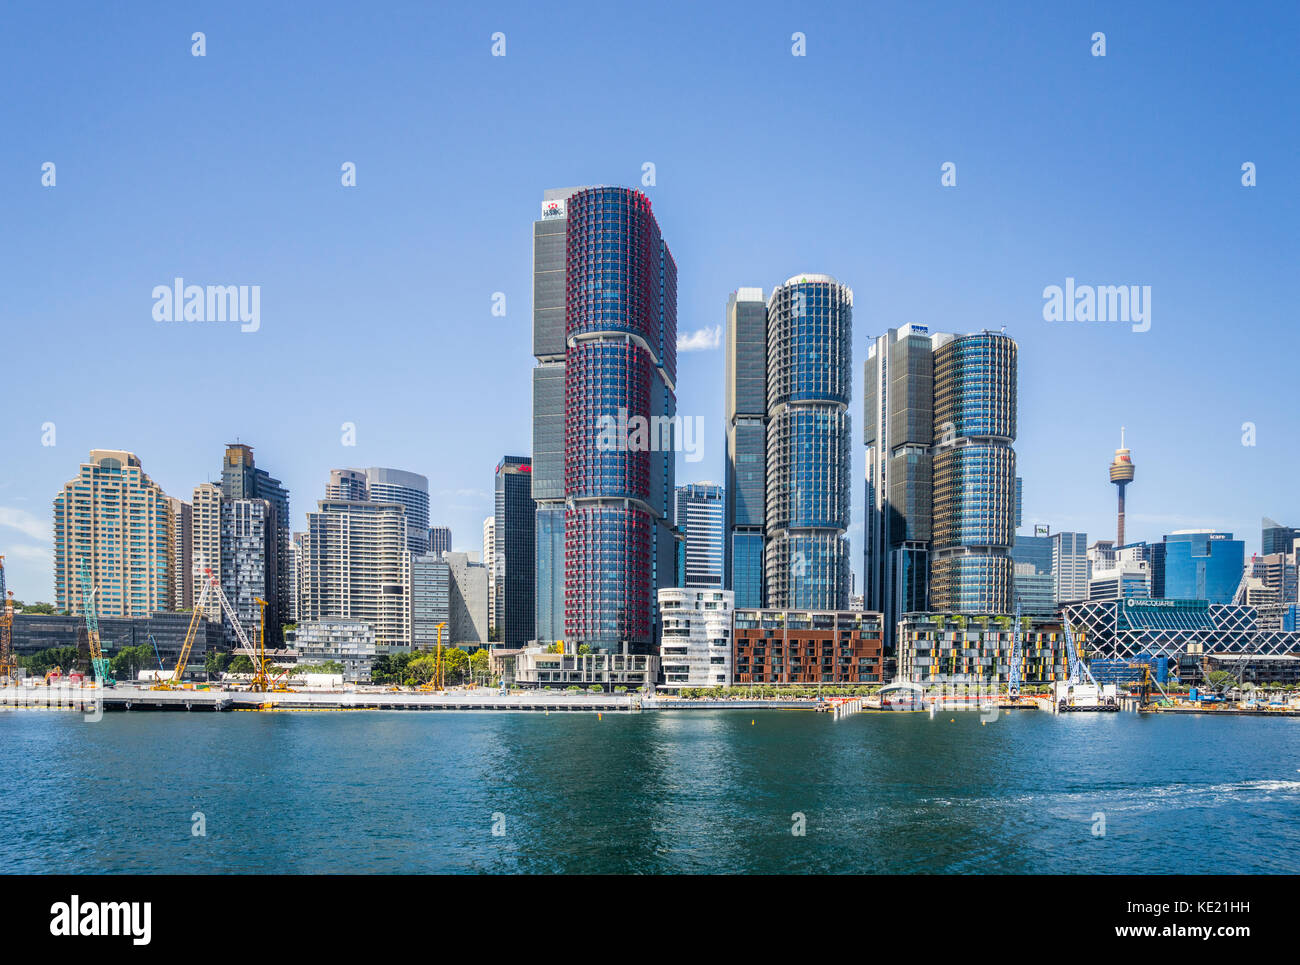 Australia, New South Wales, Sydney, Darling Harbour, view of the Barangaroo International Towers Sydney, with the prominent One International Tower ag Stock Photo